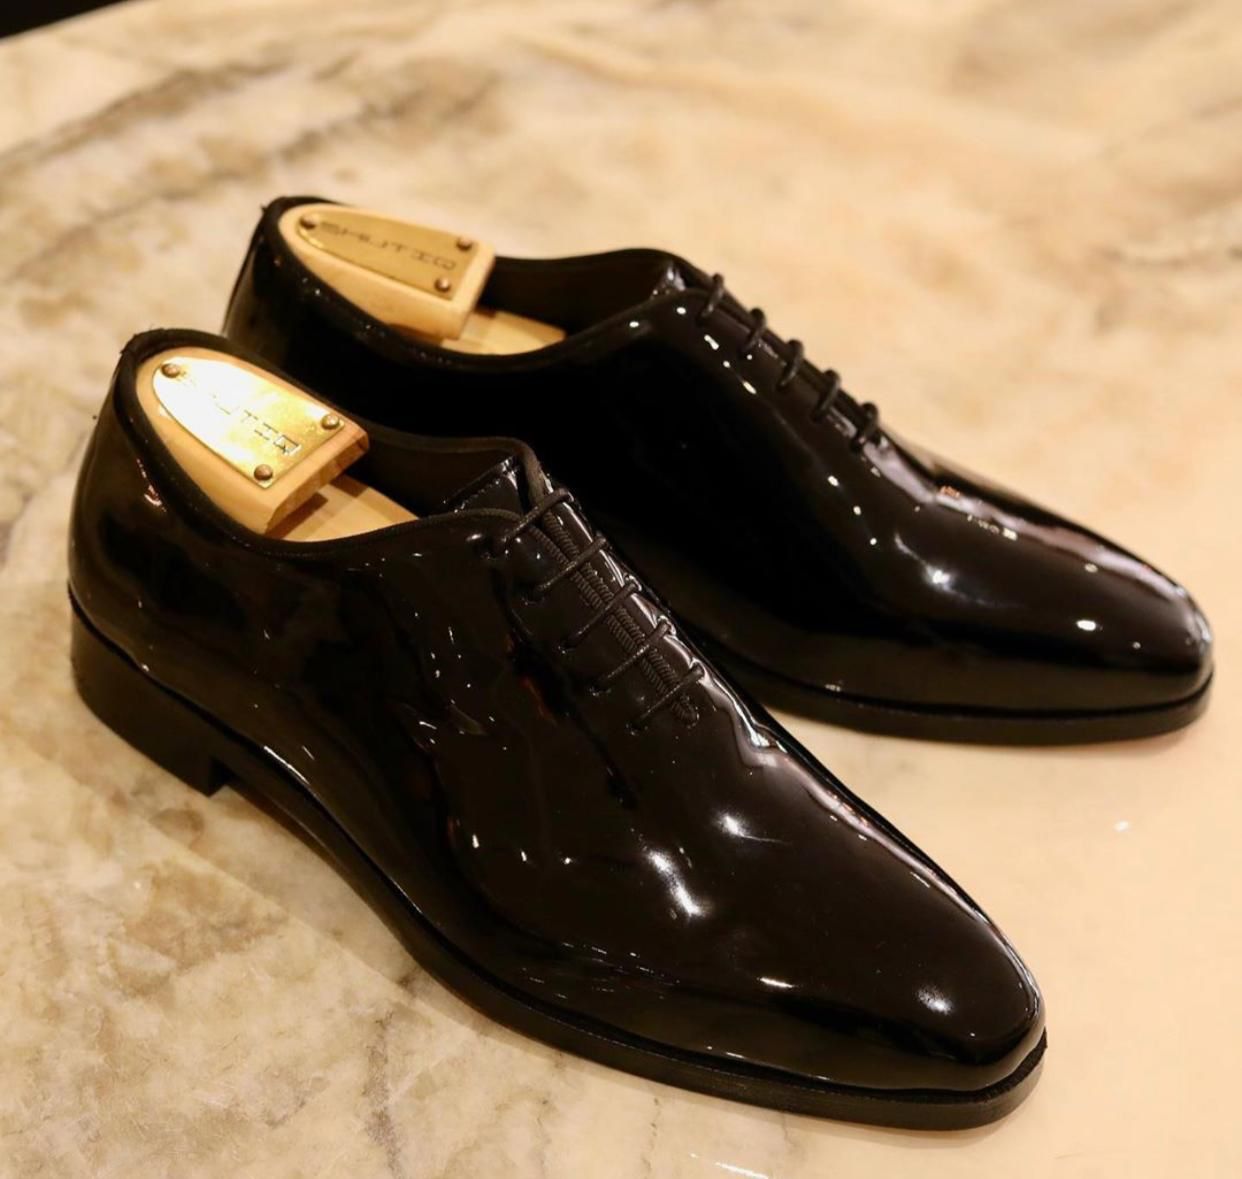 Shiny Oxford Lace-up Shoes Elevate Your Formal Style from Business to Black-Tie - JACKMARC.COM